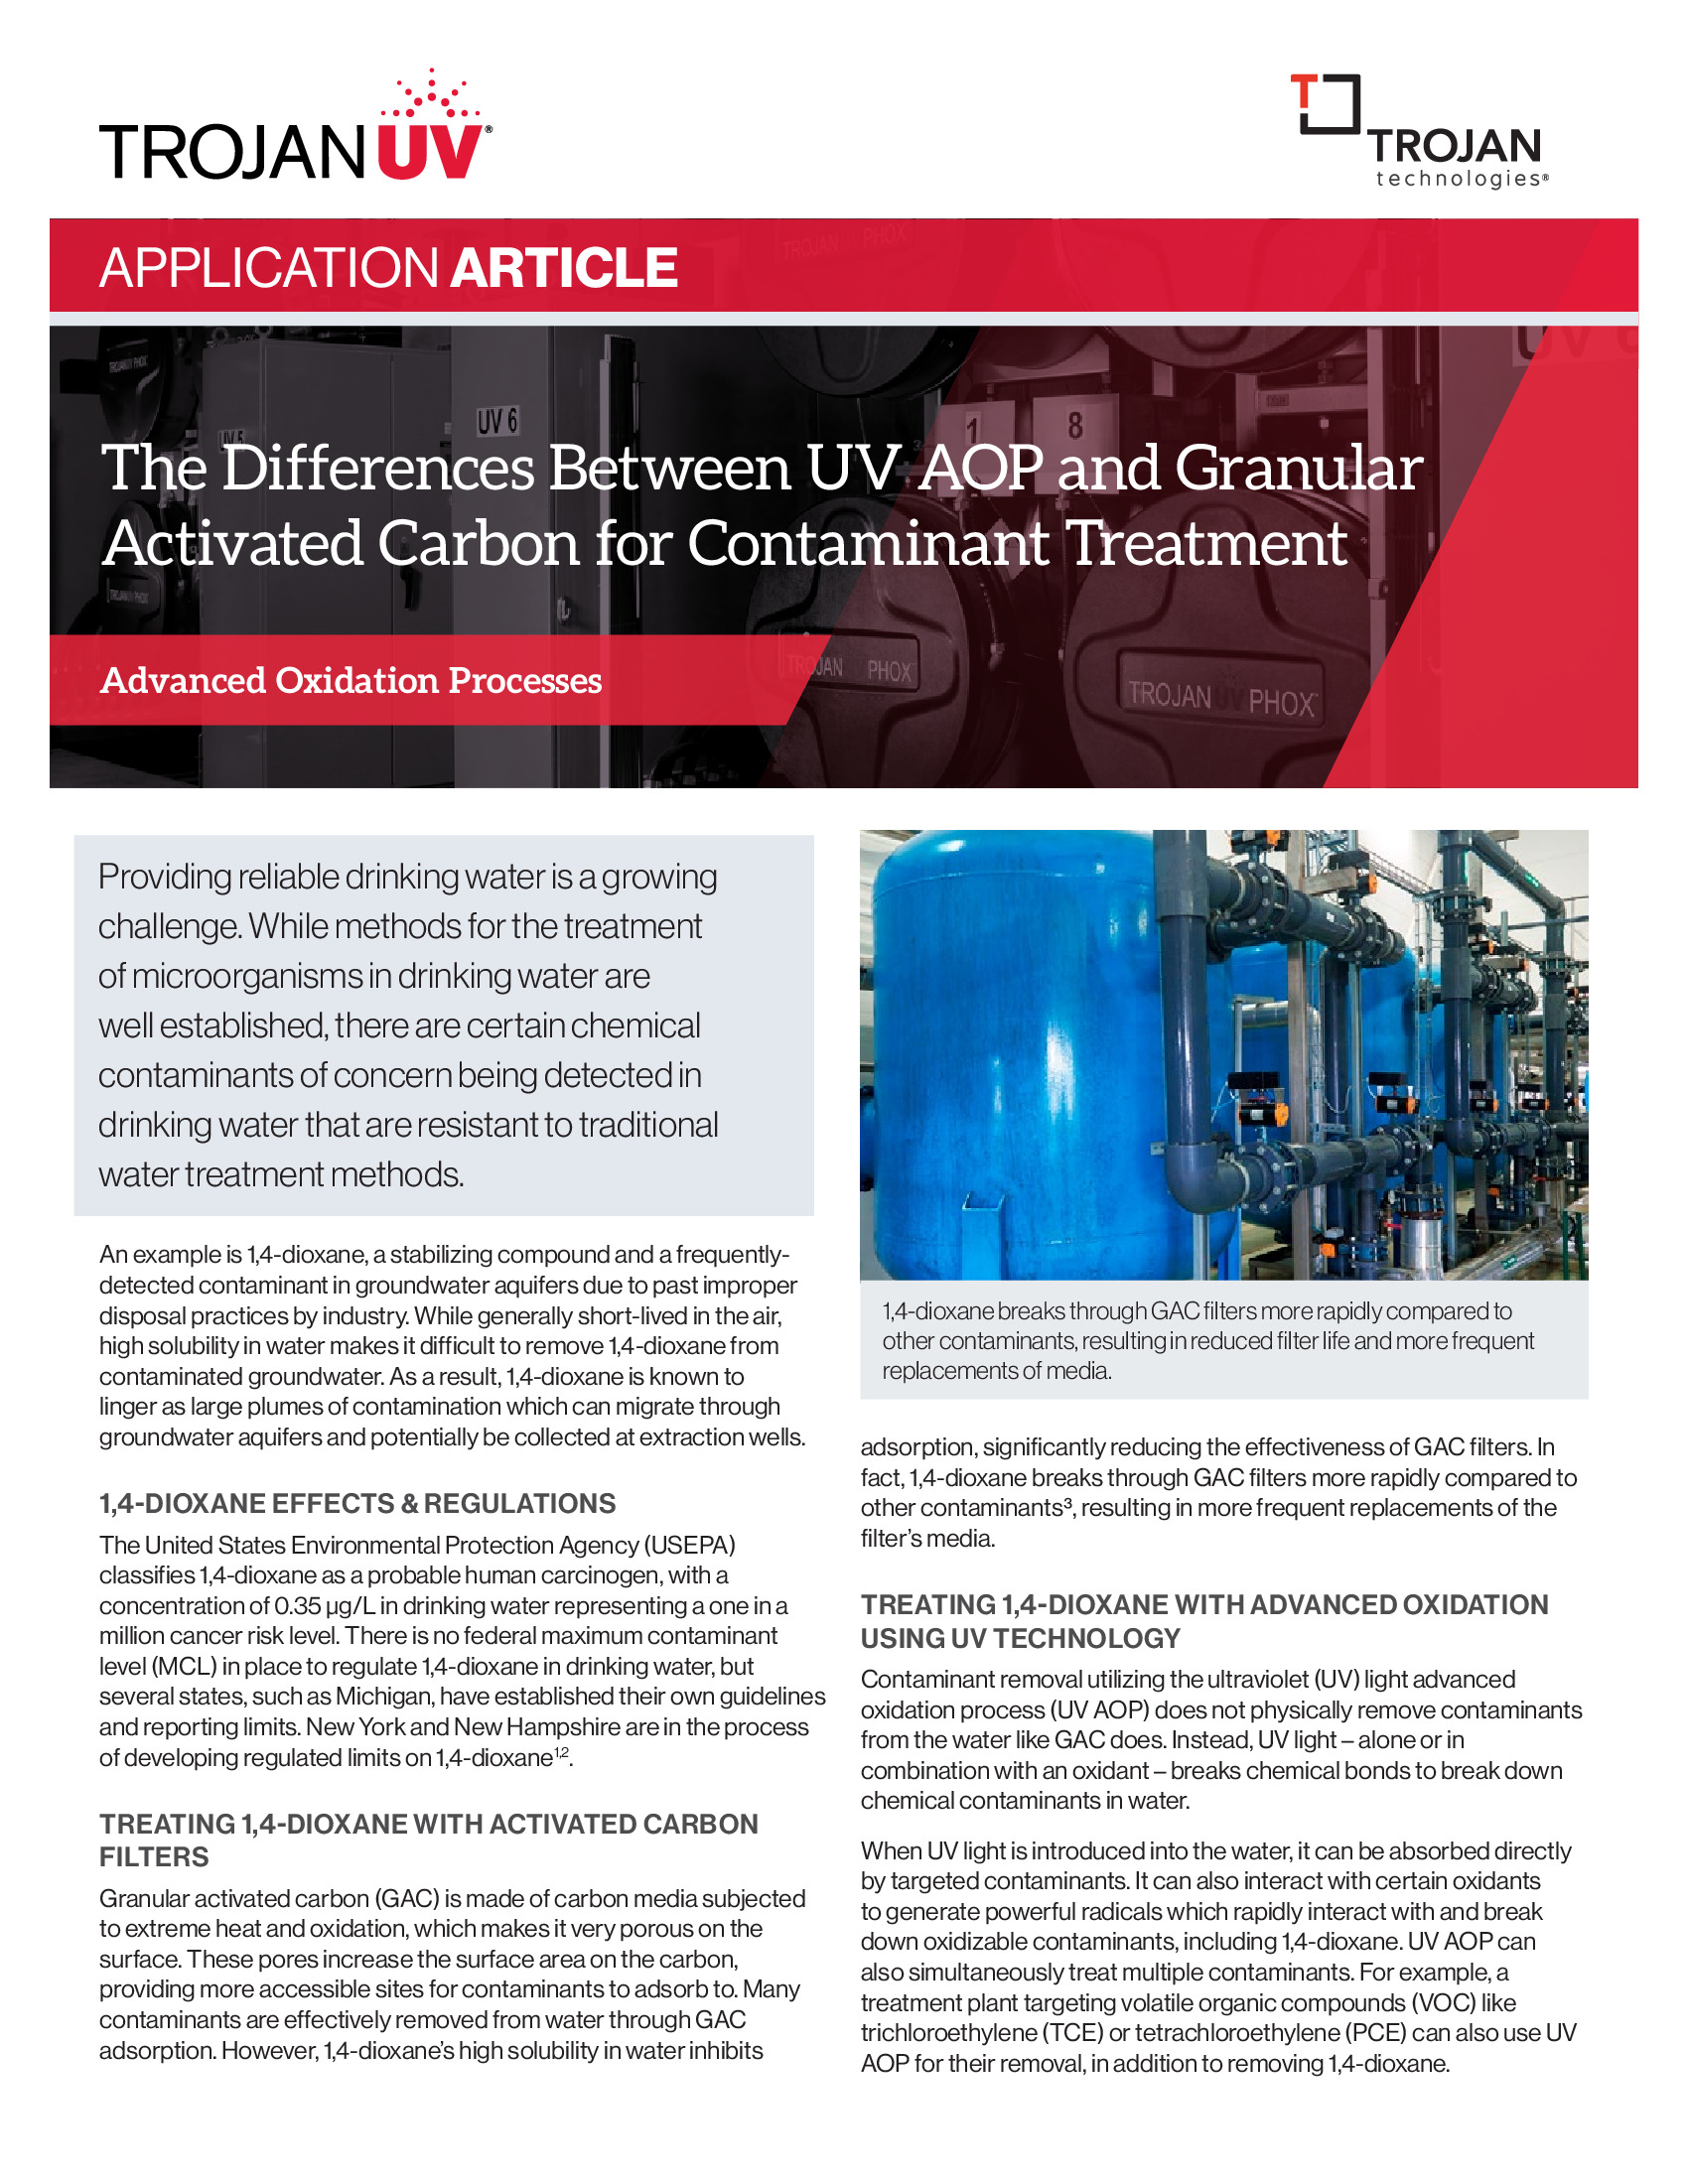 The Differences Between UV AOP and Granular Activated Carbon for Contaminant Treatment